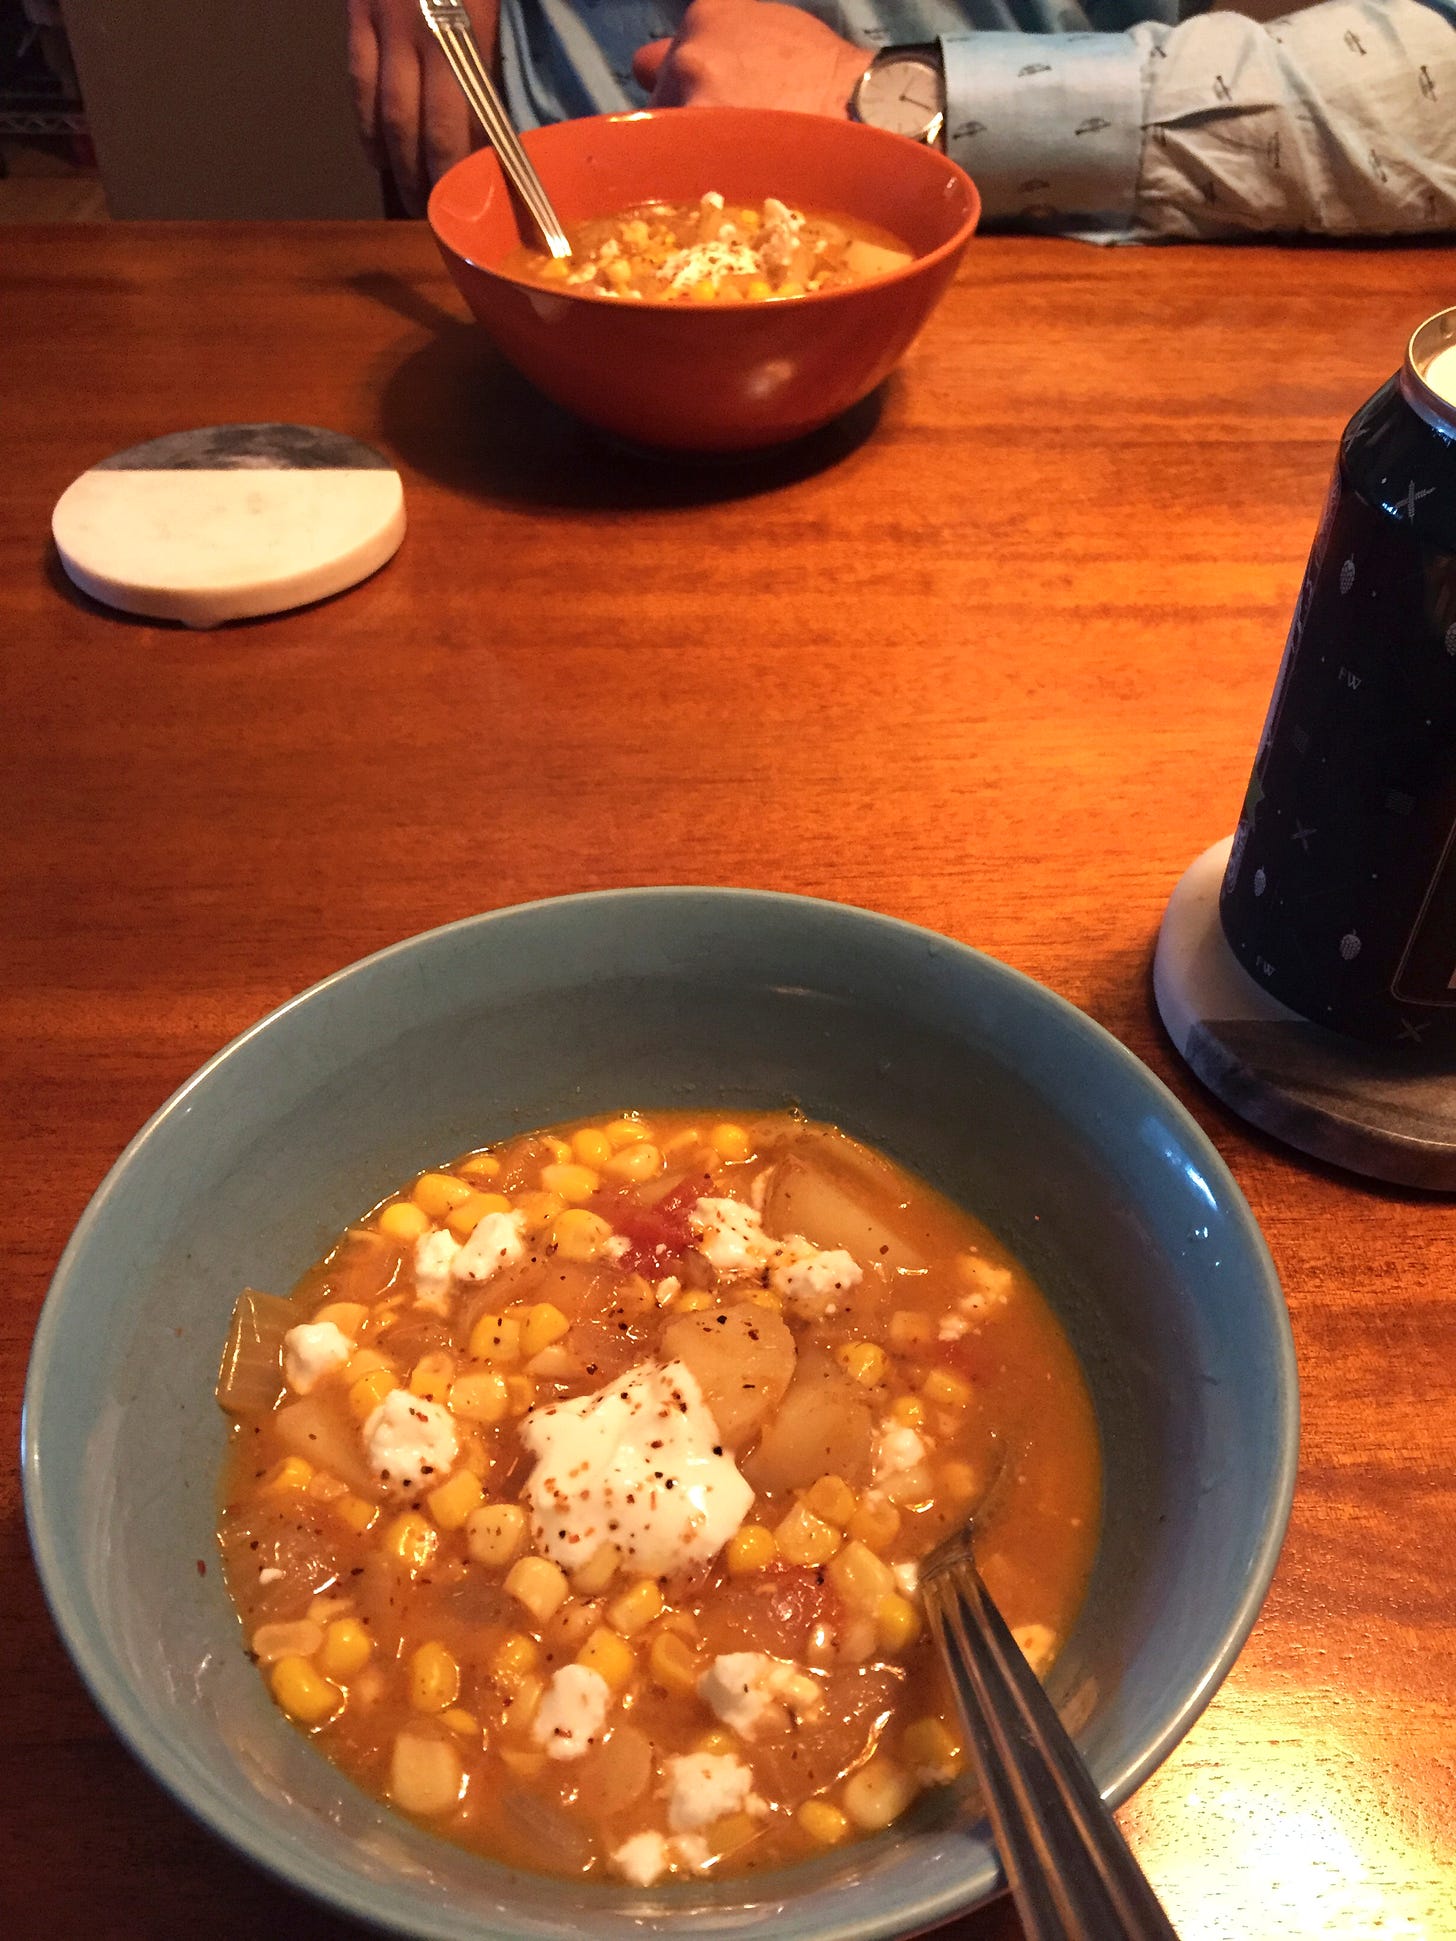 Two bowls of corn chowder across from each other on the table. On top of the soup is a dollop of yogurt, crumbles of feta, and tajín seasoning. On a coaster next to one of the bowls is a blue can of beer.